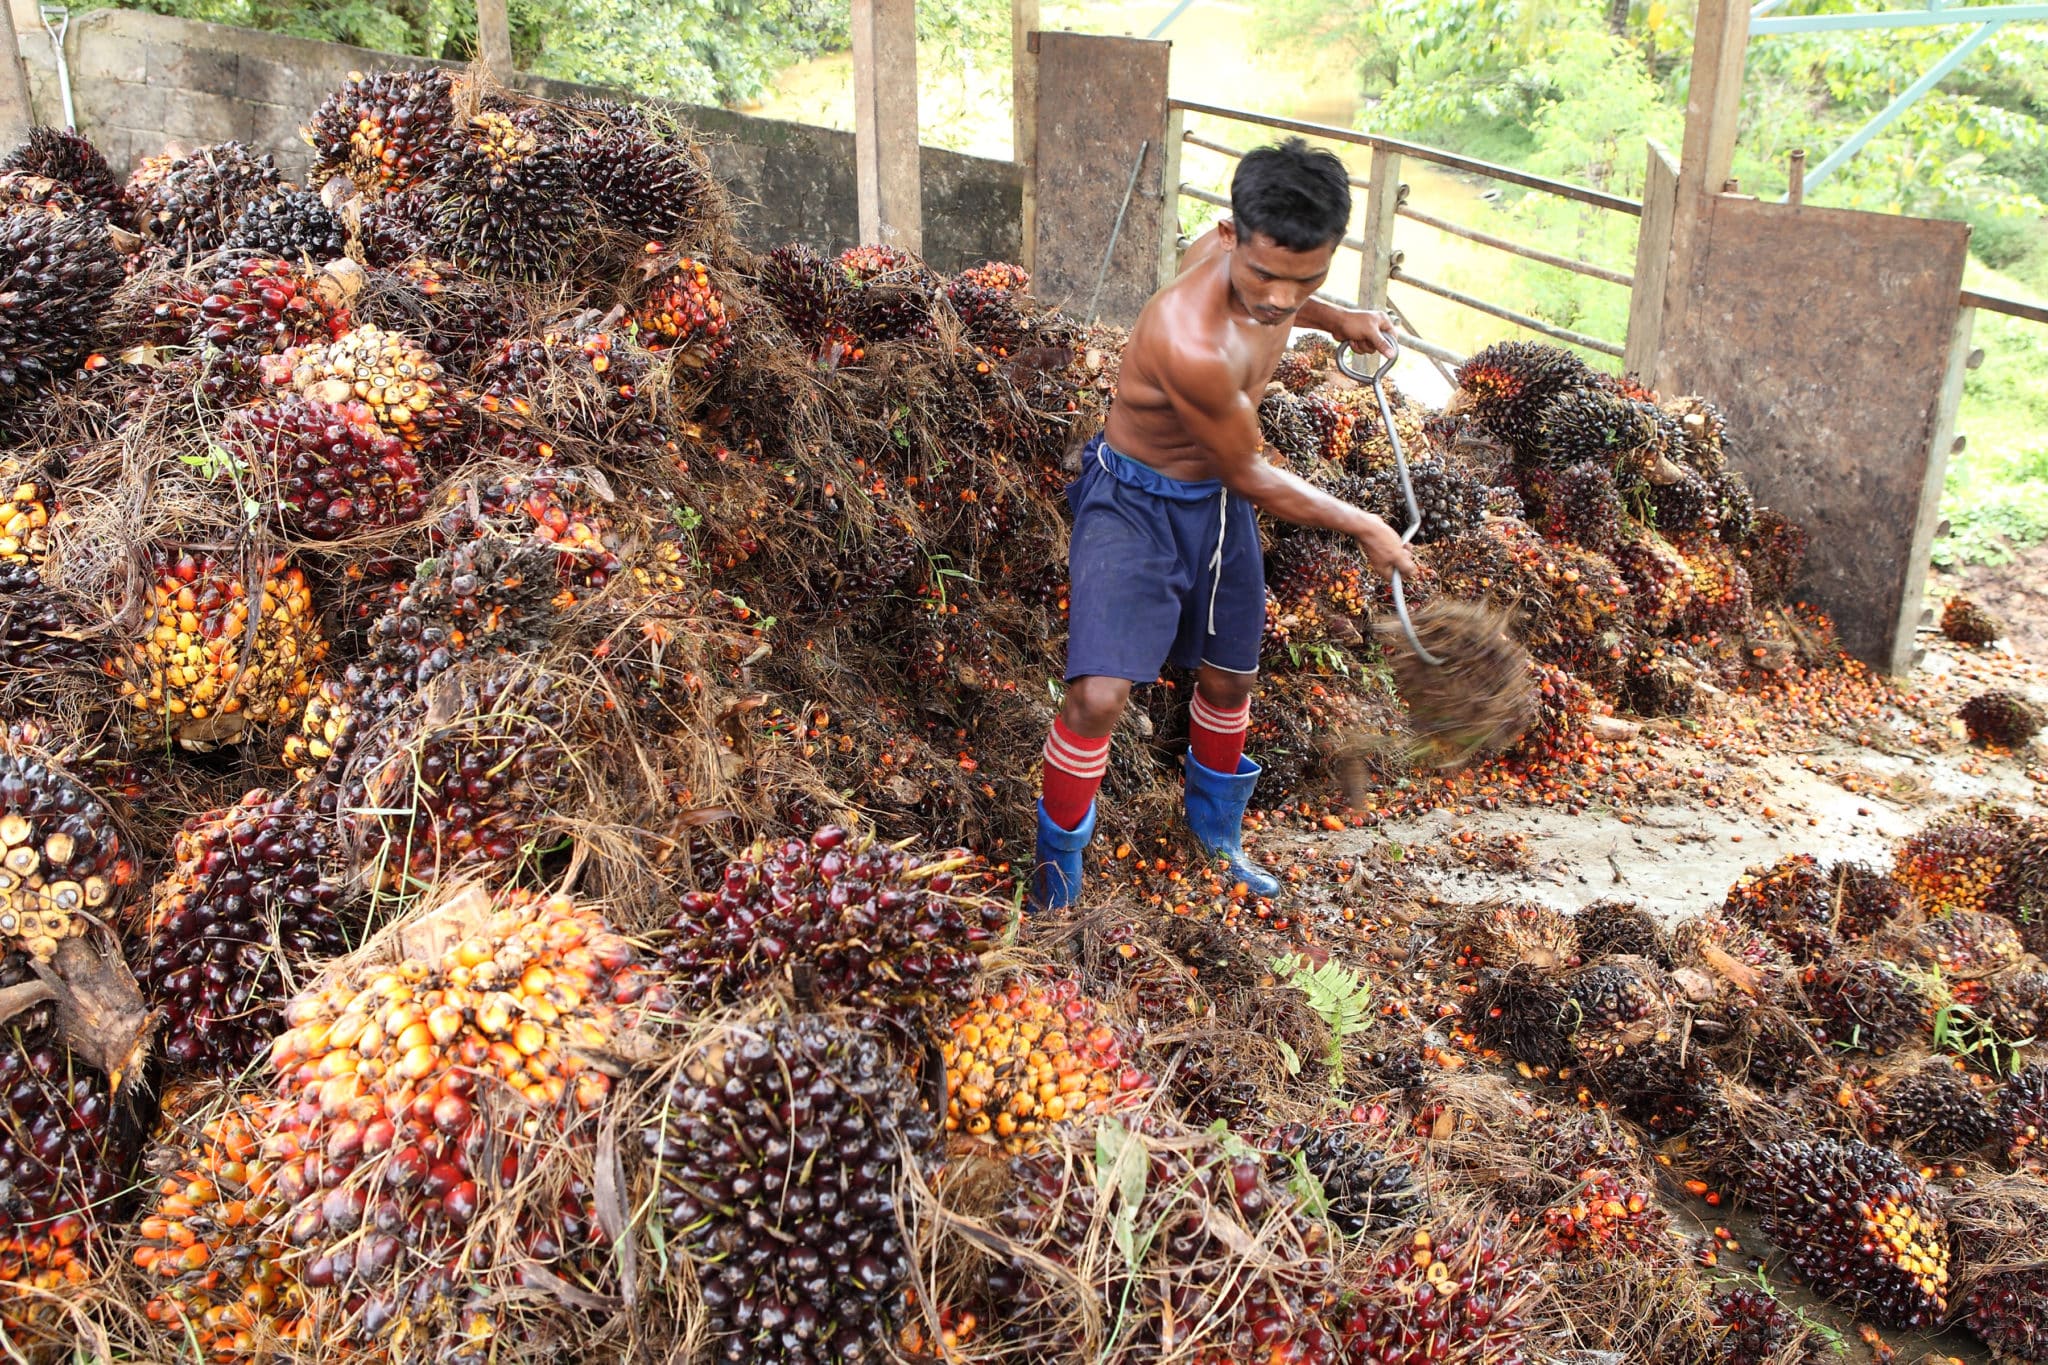 Behind The Profits From Palm Oil Production Lies The Suffering Of Millions